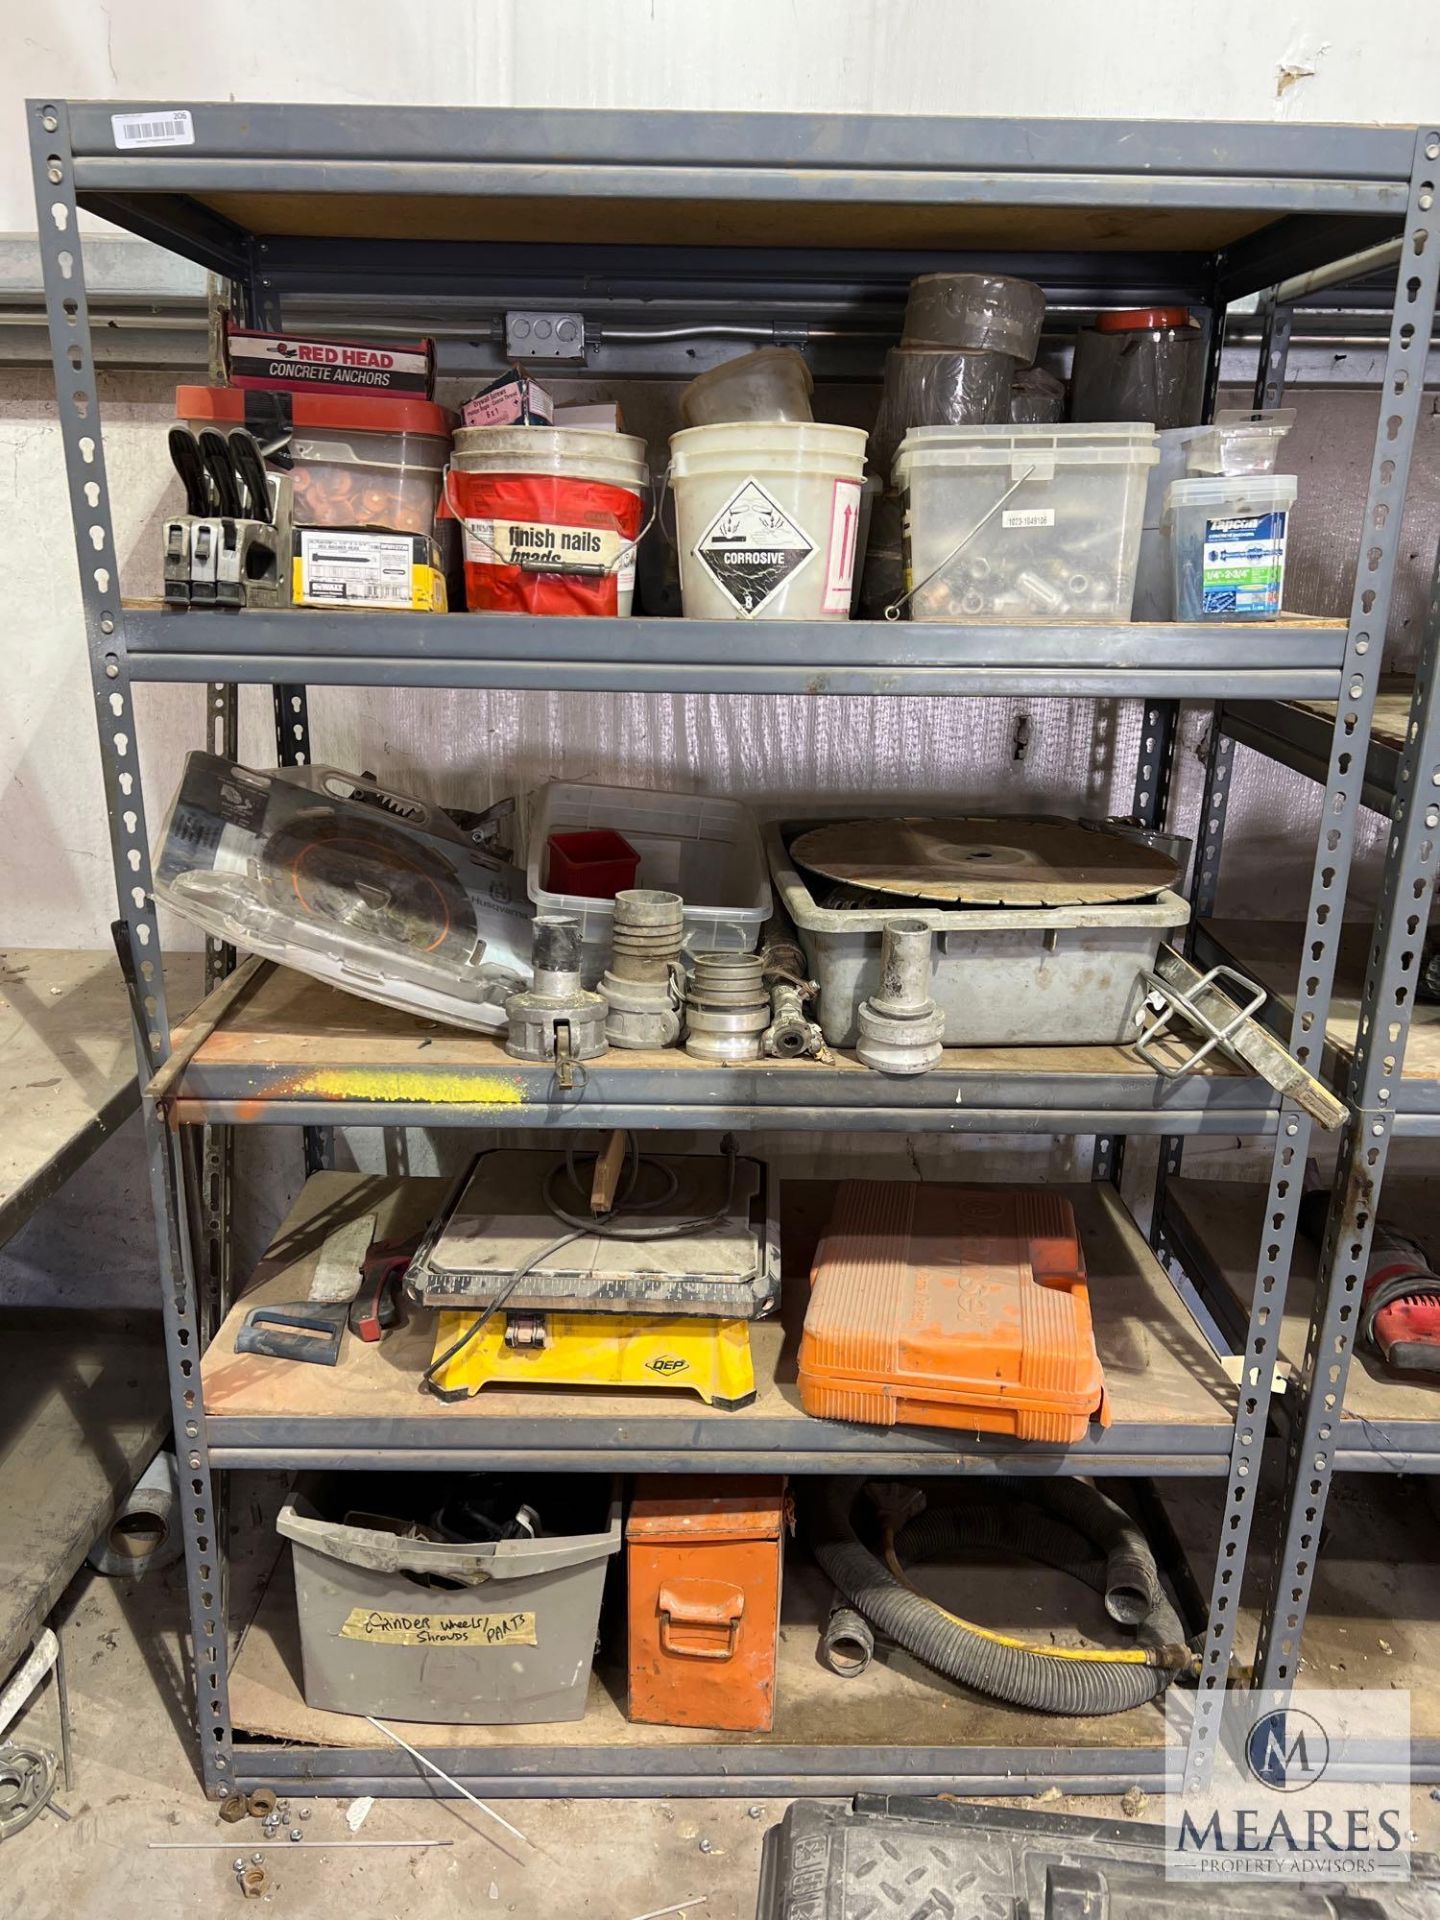 Shelf and Contents - Fasteners, Blades, Tile Saw